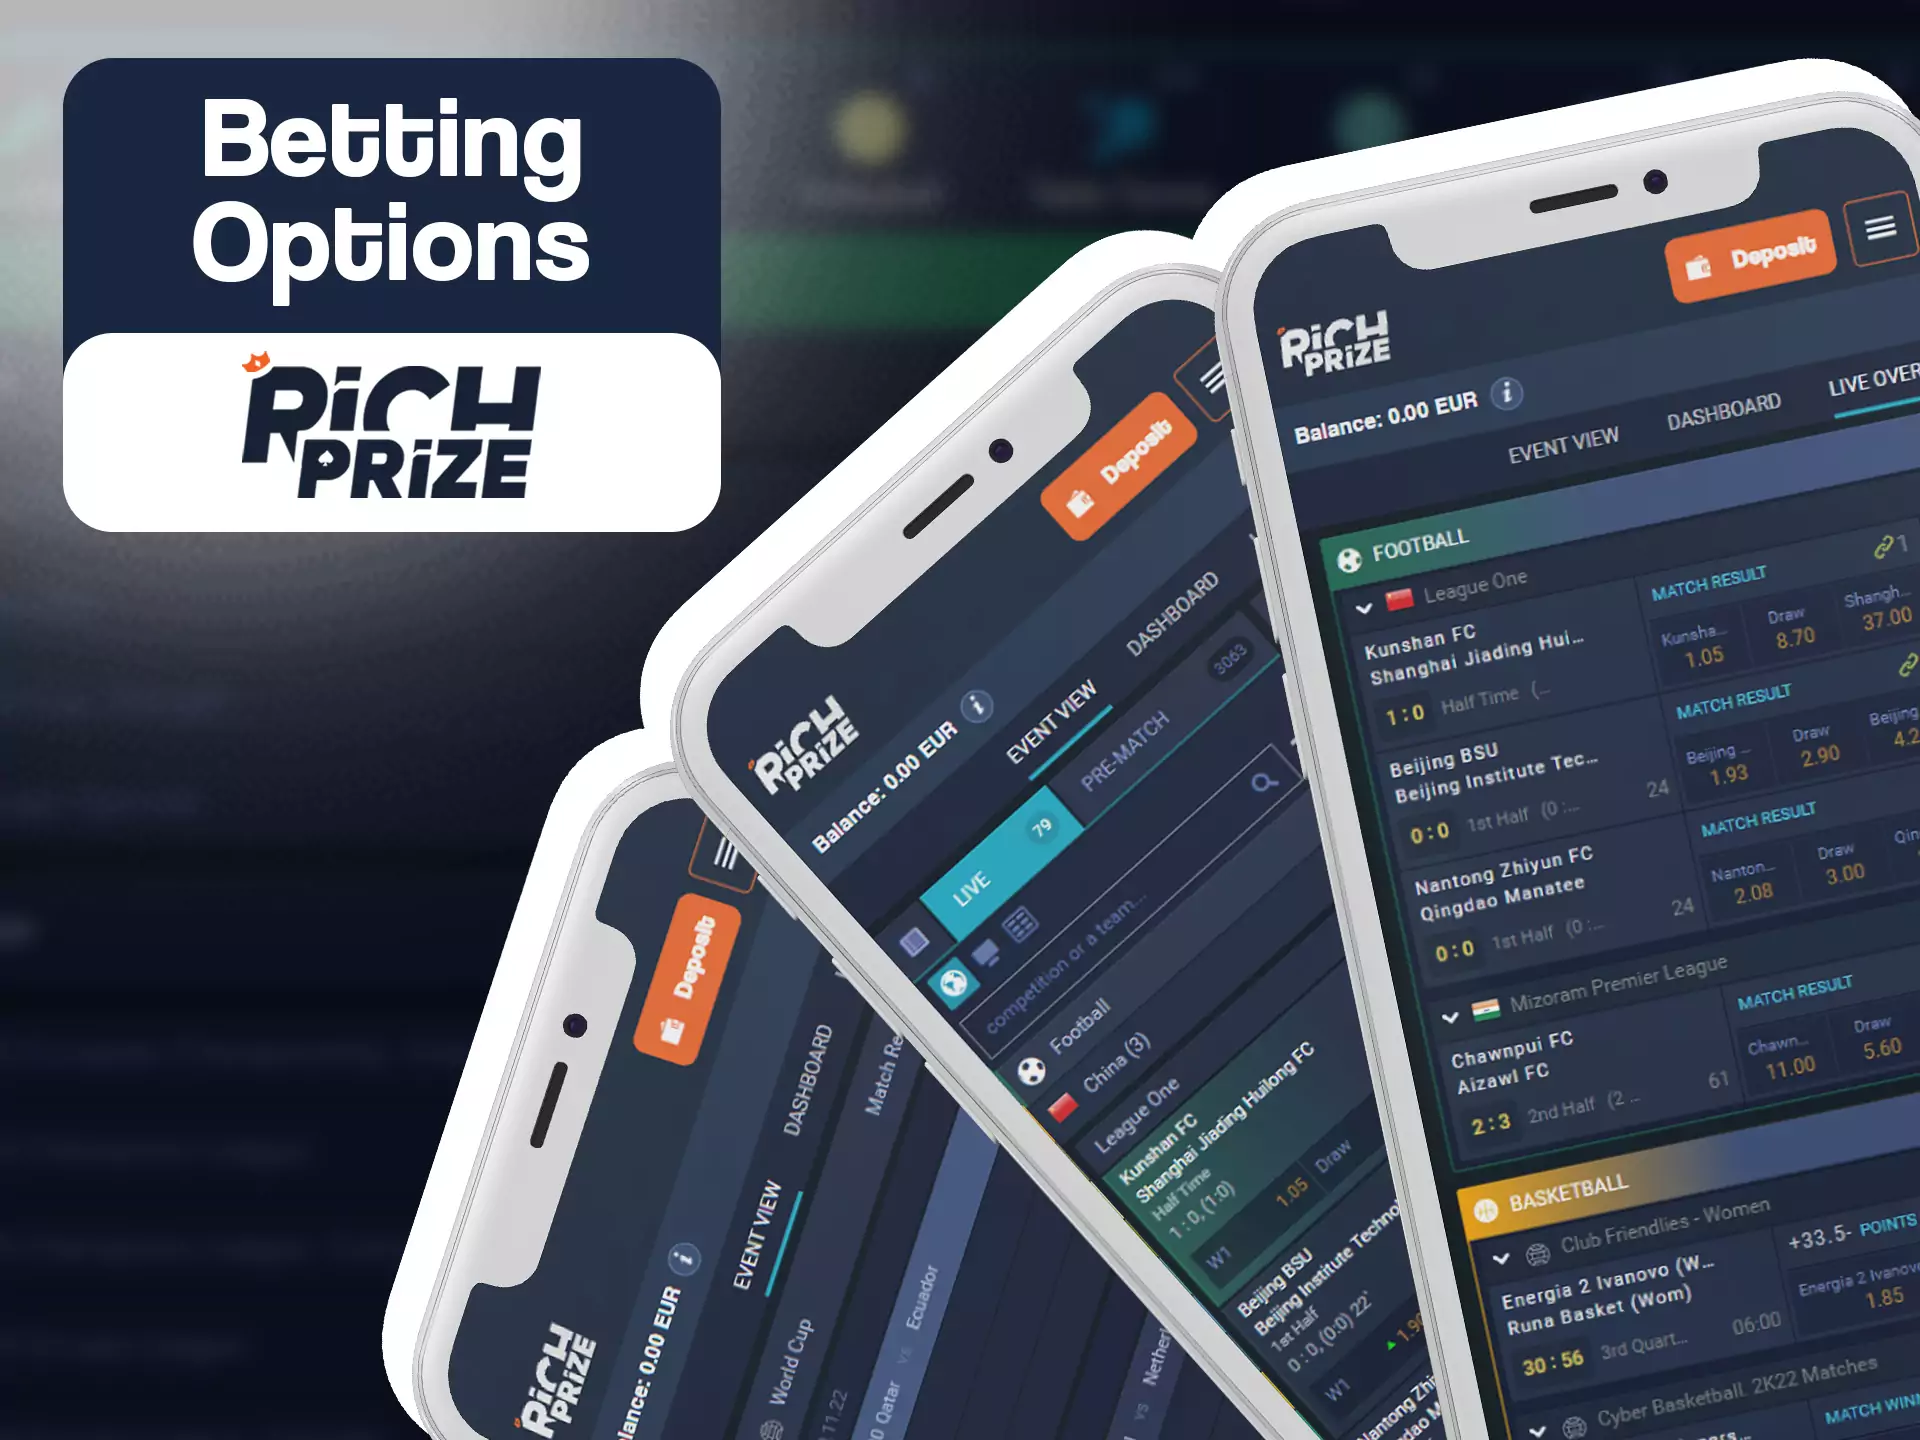 Try all of the betting functions of RichPrize app.